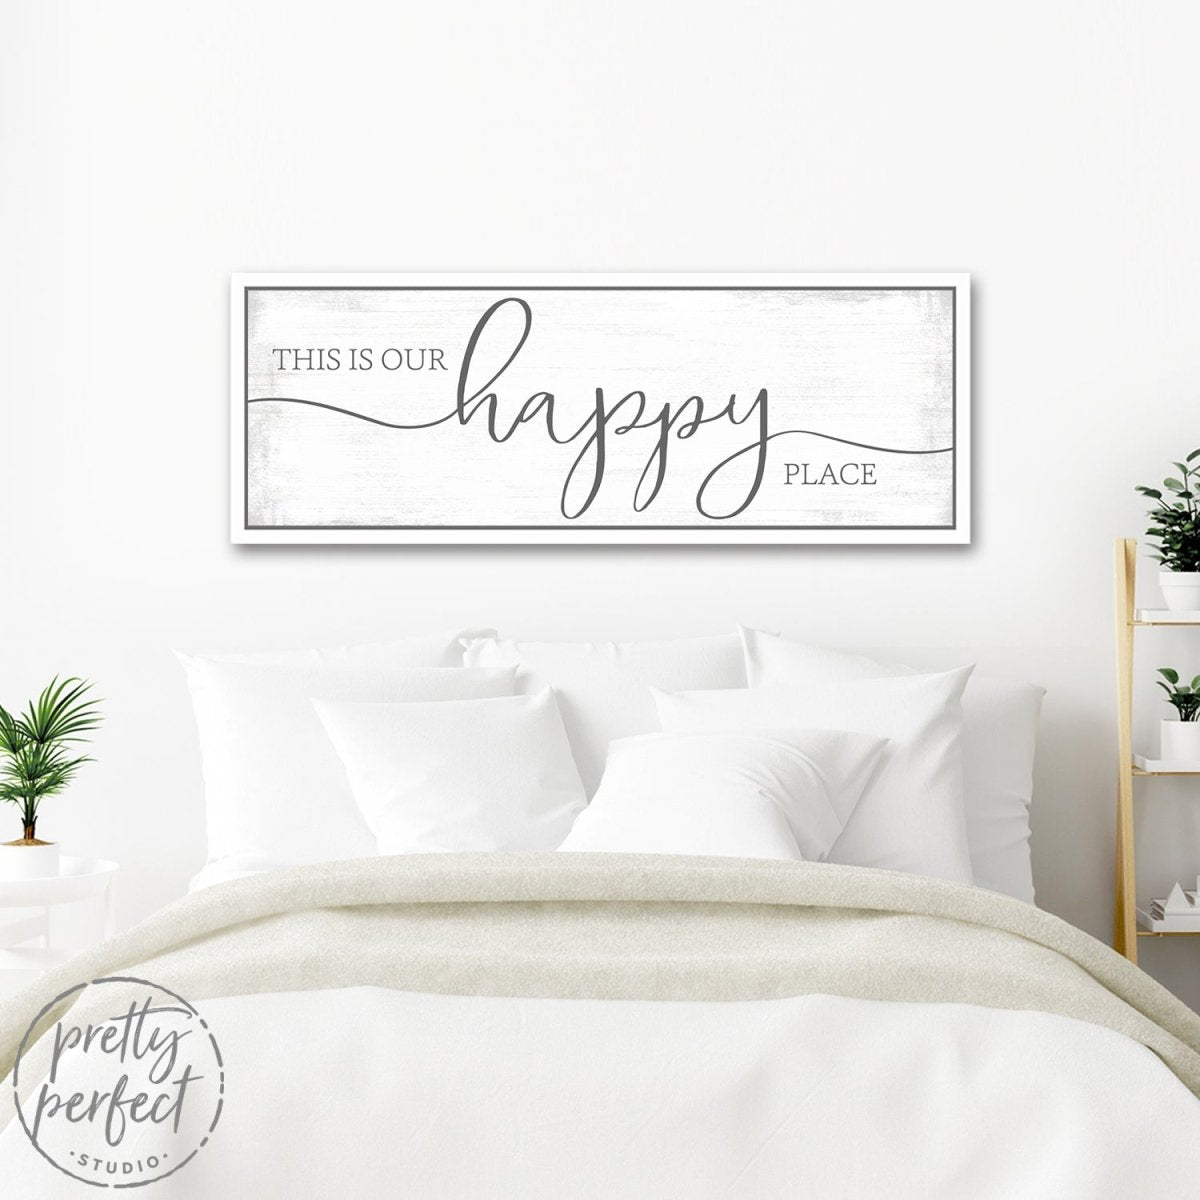 This Is Our Happy Place Sign Above Bed In Bedroom - Pretty Perfect Studio